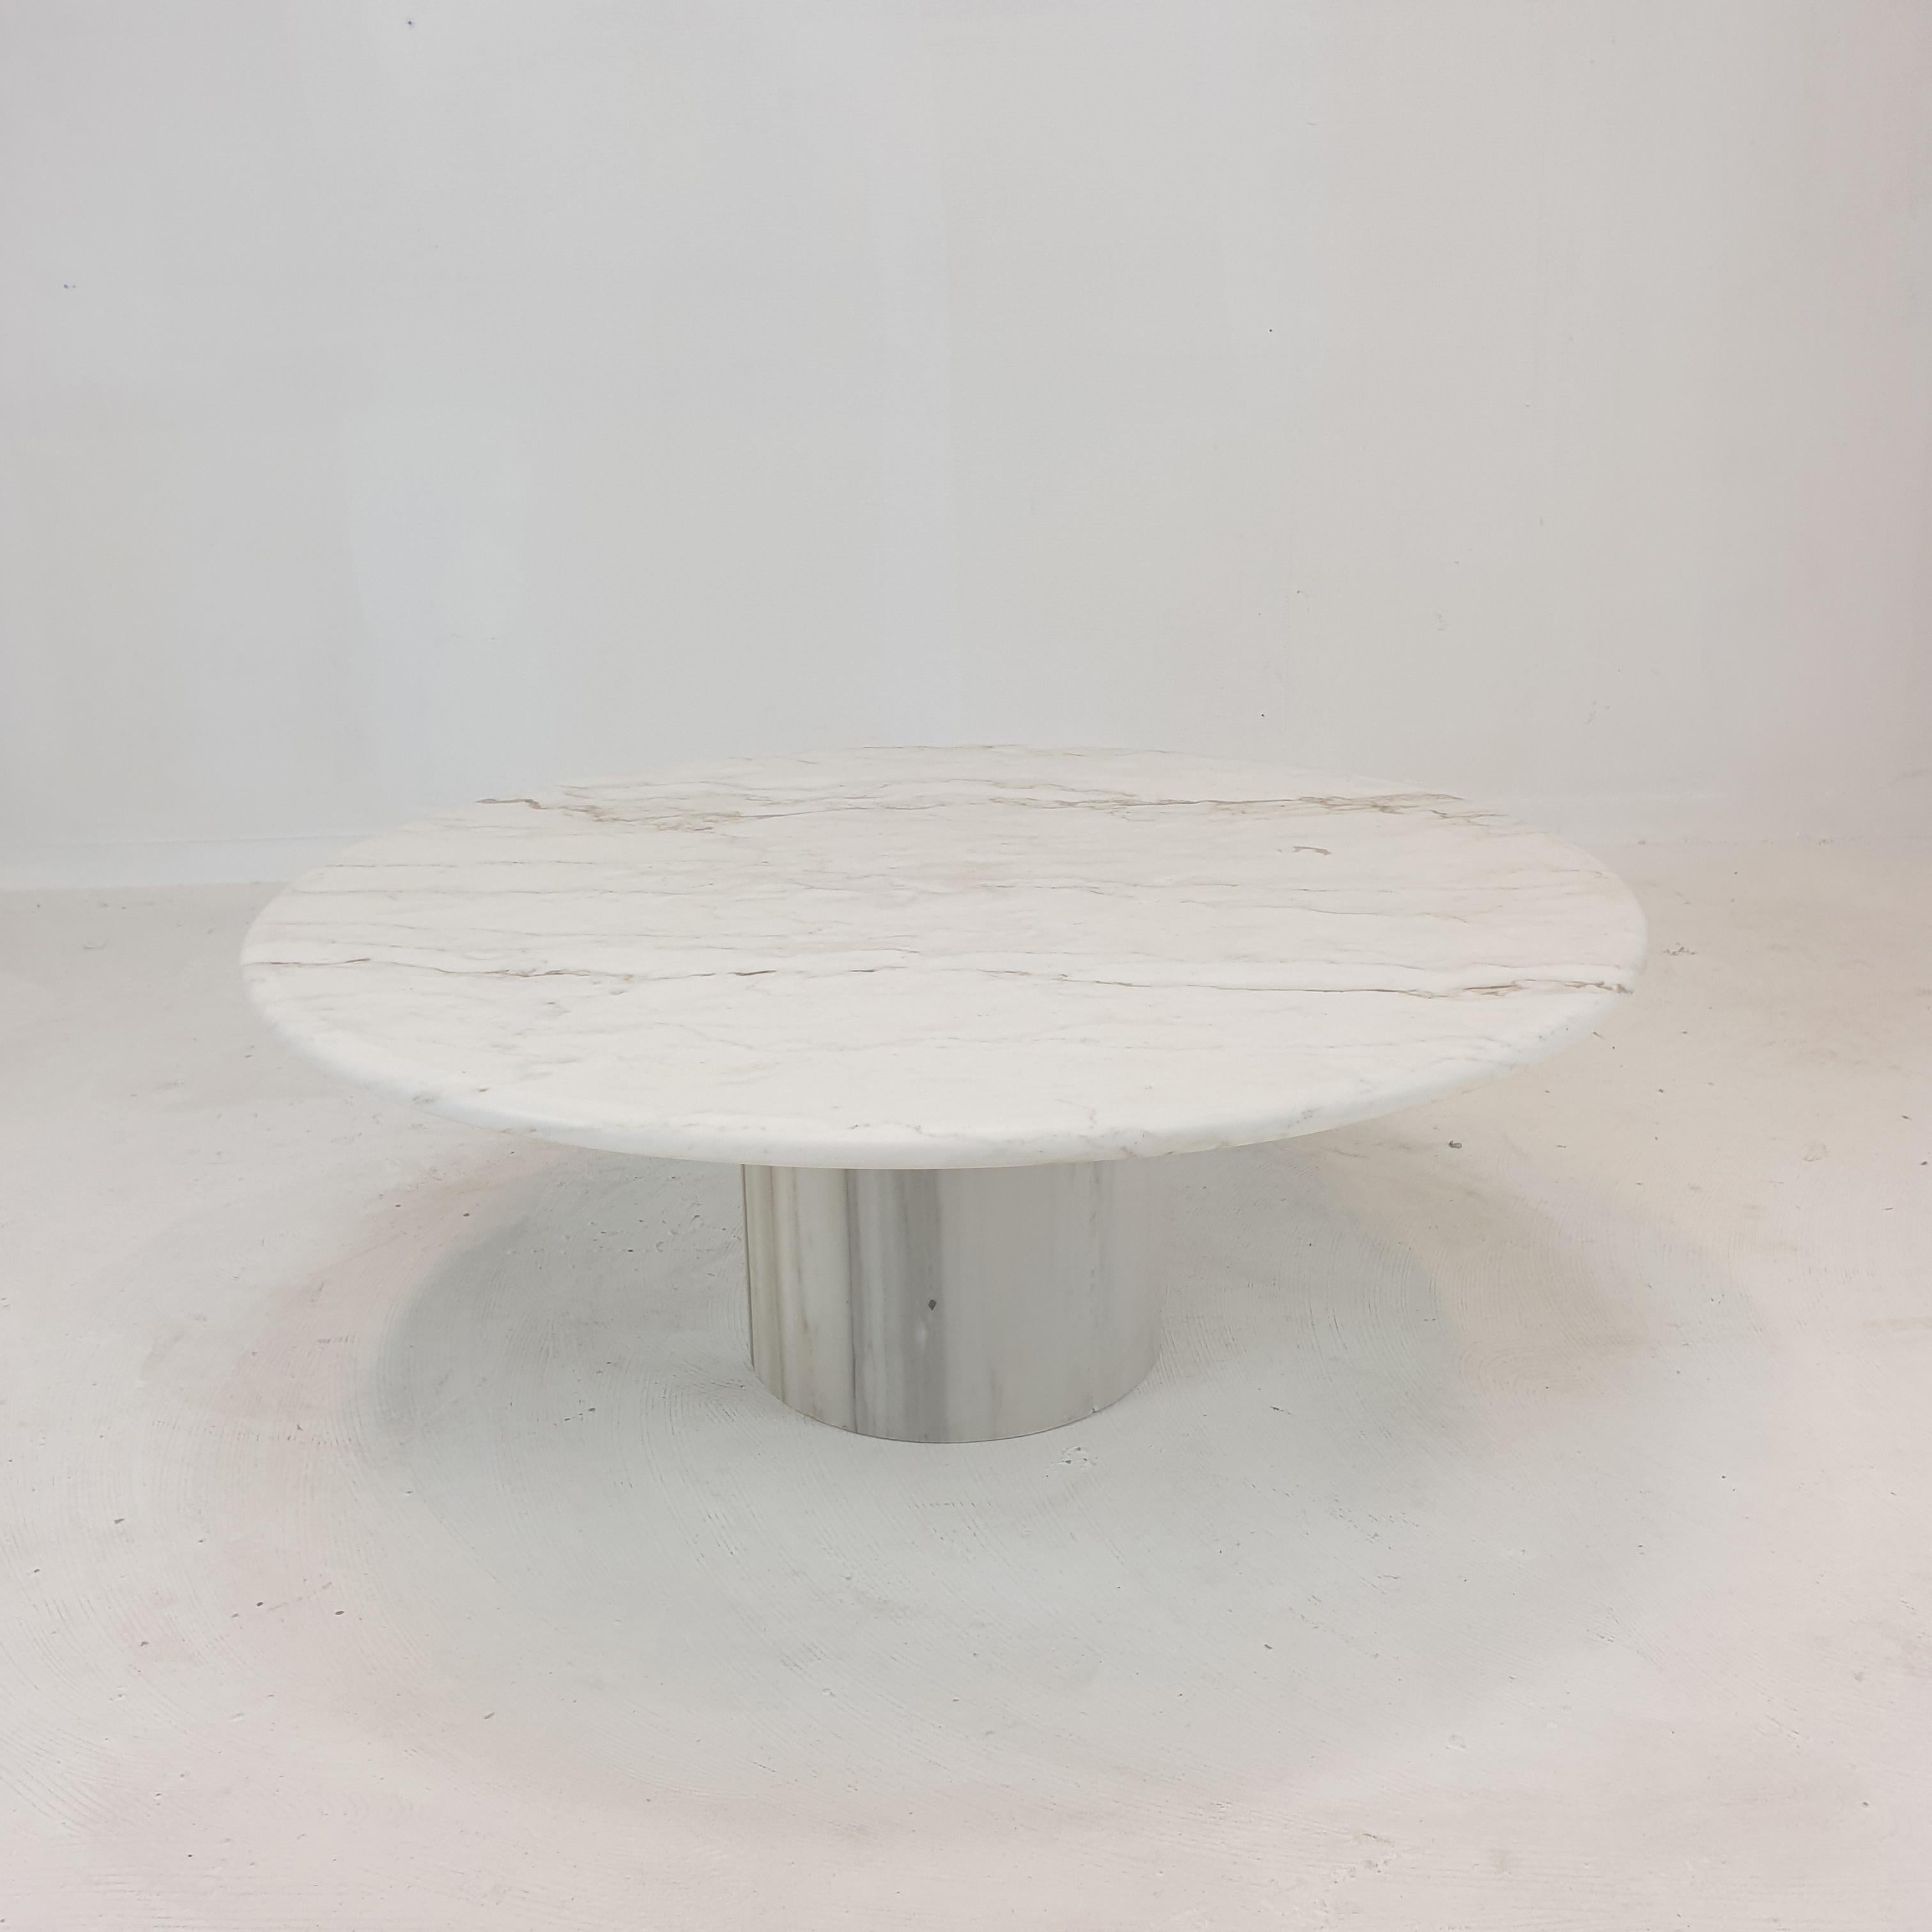 A very beautiful Italian coffee table handcrafted out of marble in the 80's.

Very nice round plate and massive round foot.
The fabulous white marble features a beautiful pattern. 


